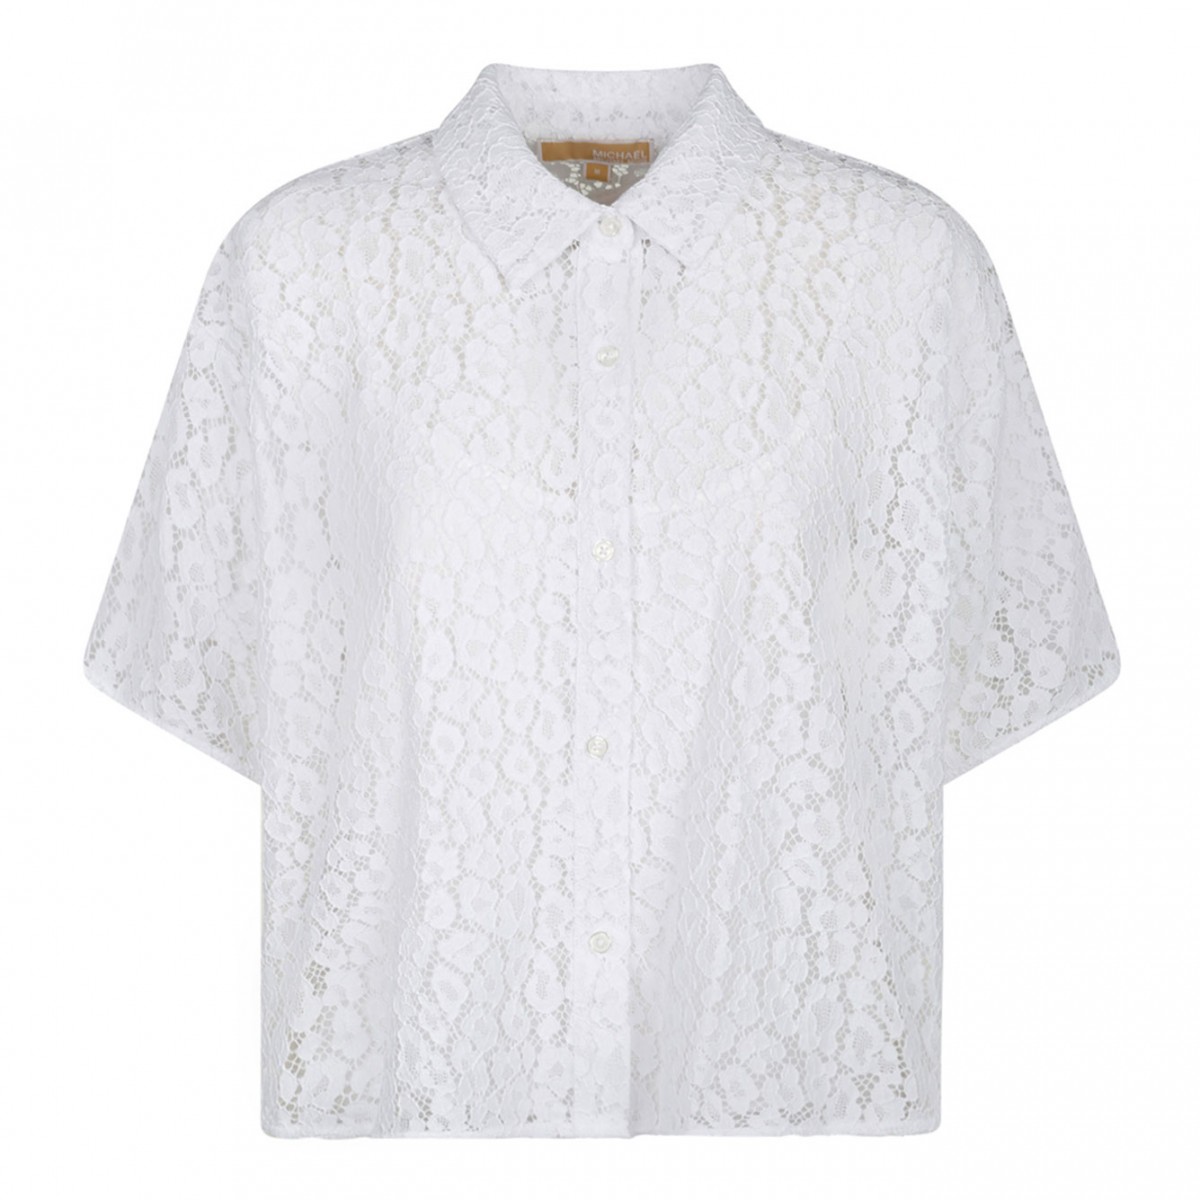 White Corded Lace Shirt